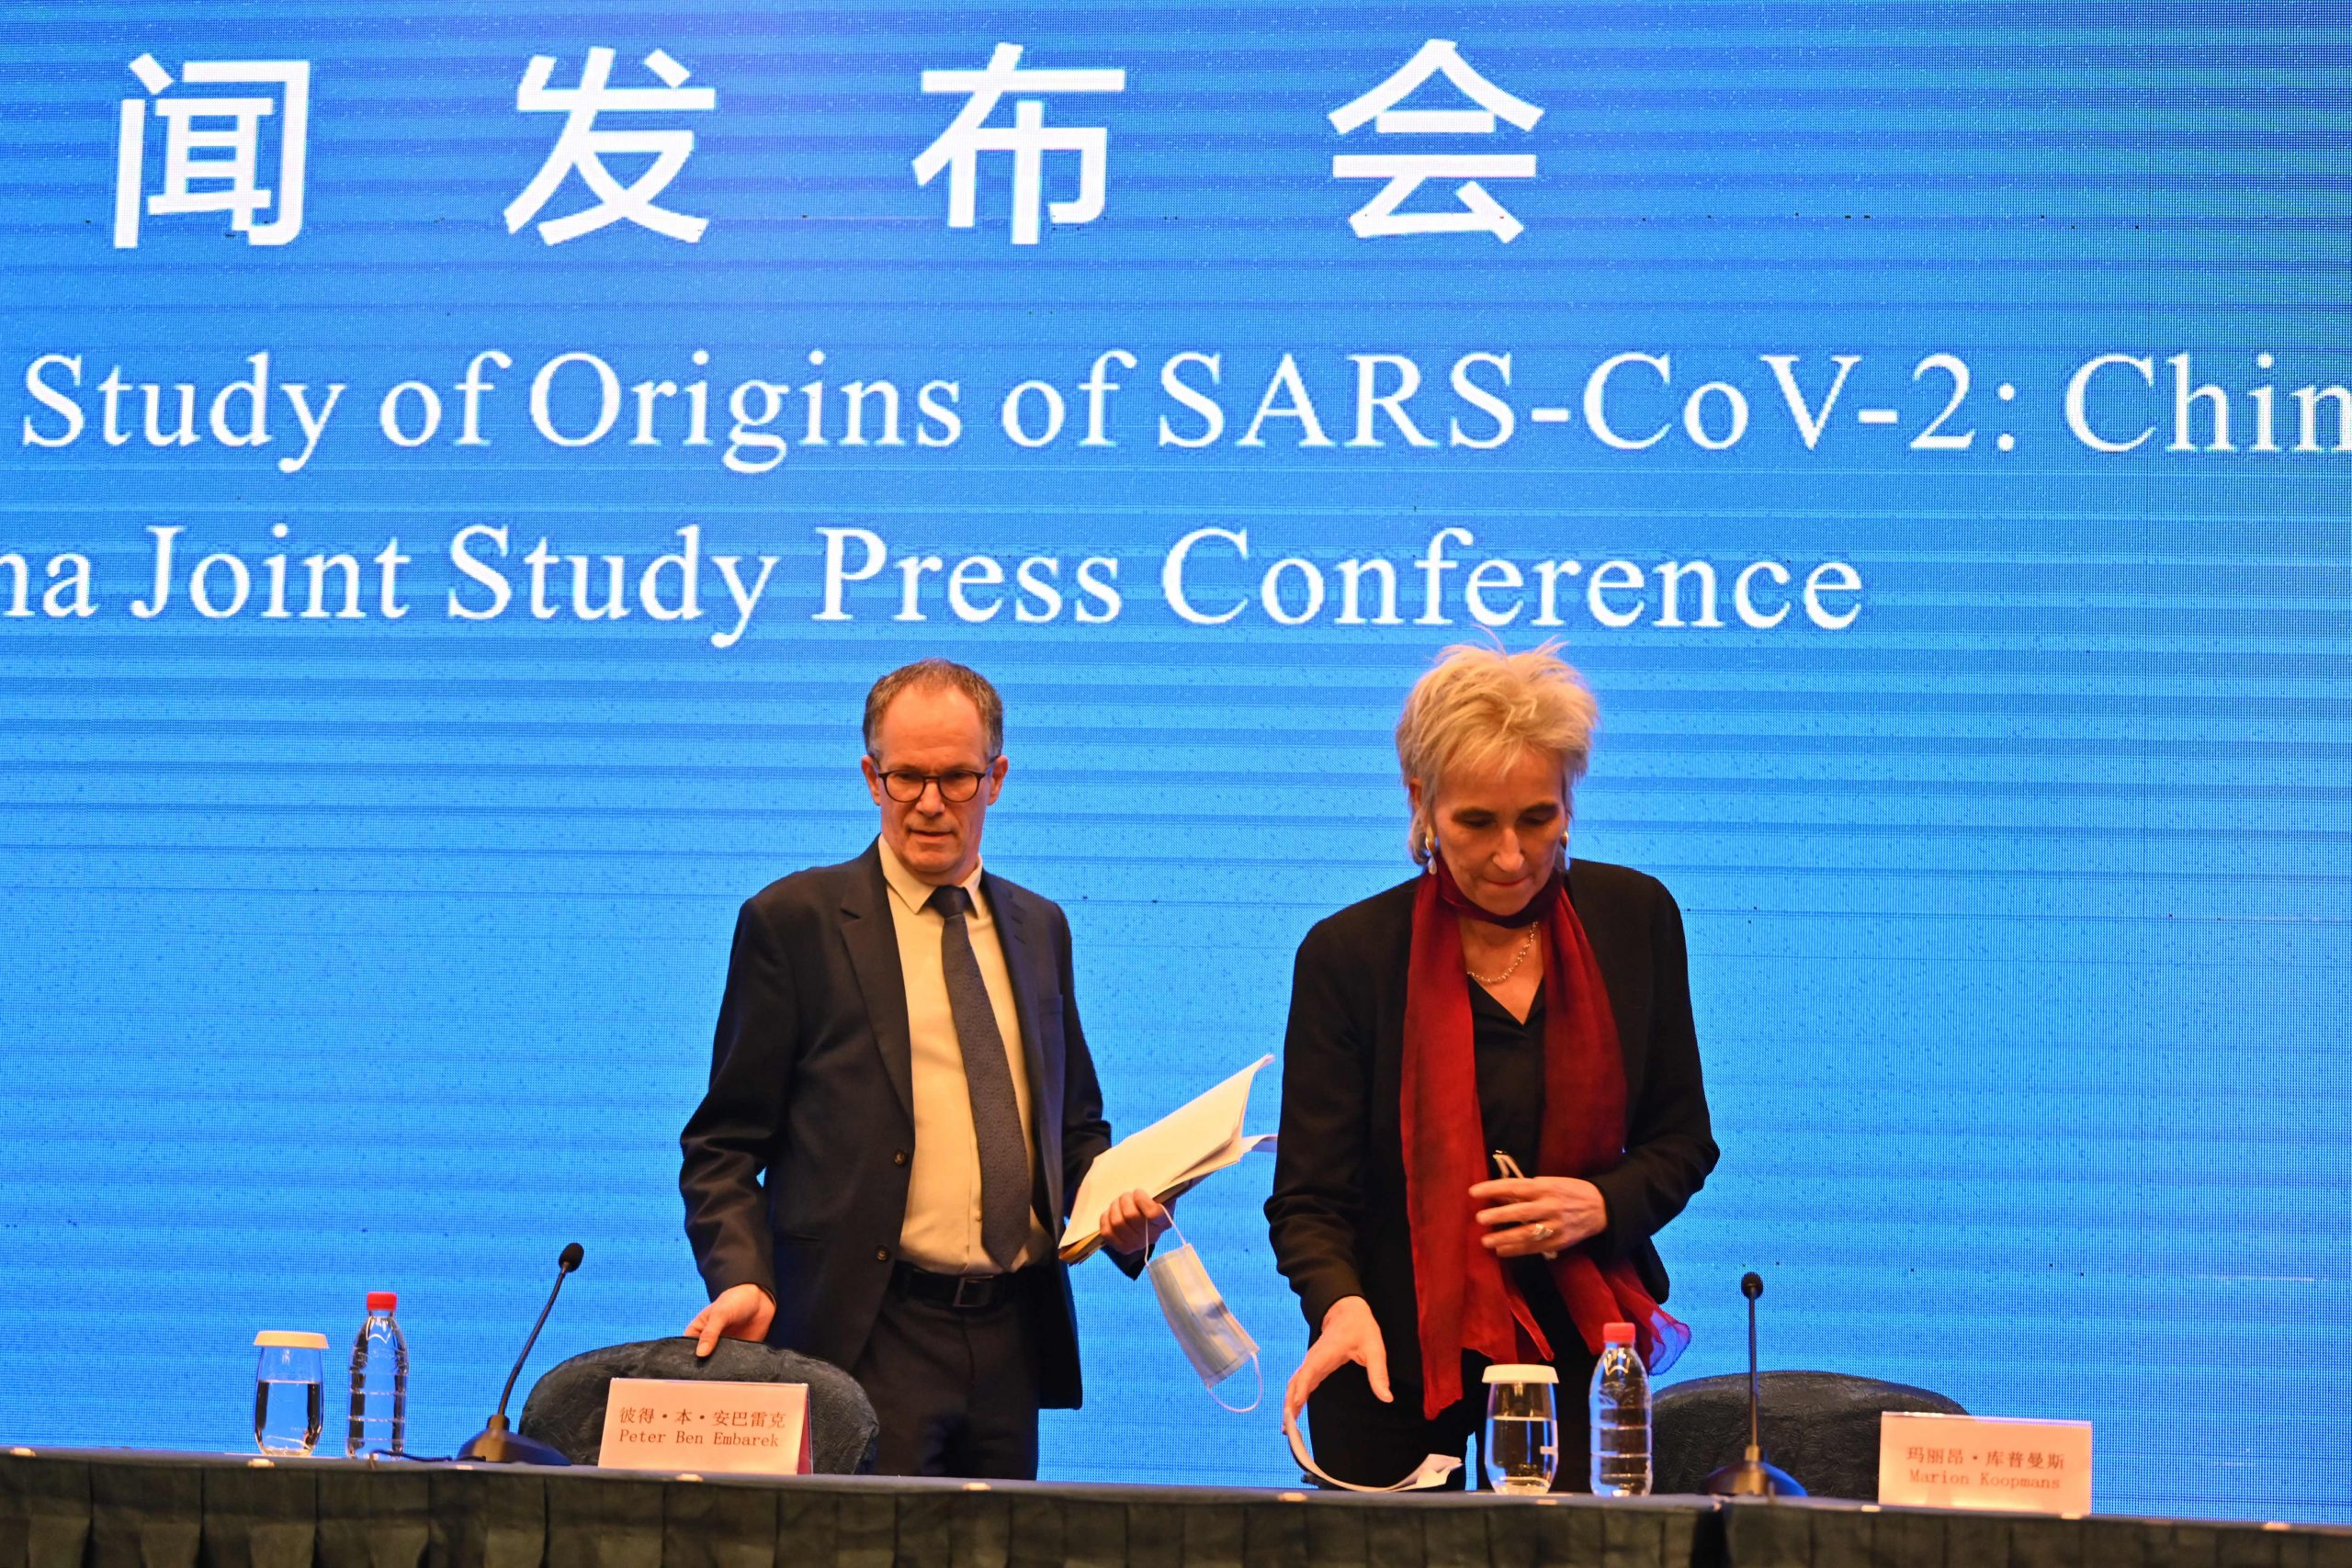 WHO outlines Wuhan findings on origins of Covid pandemic